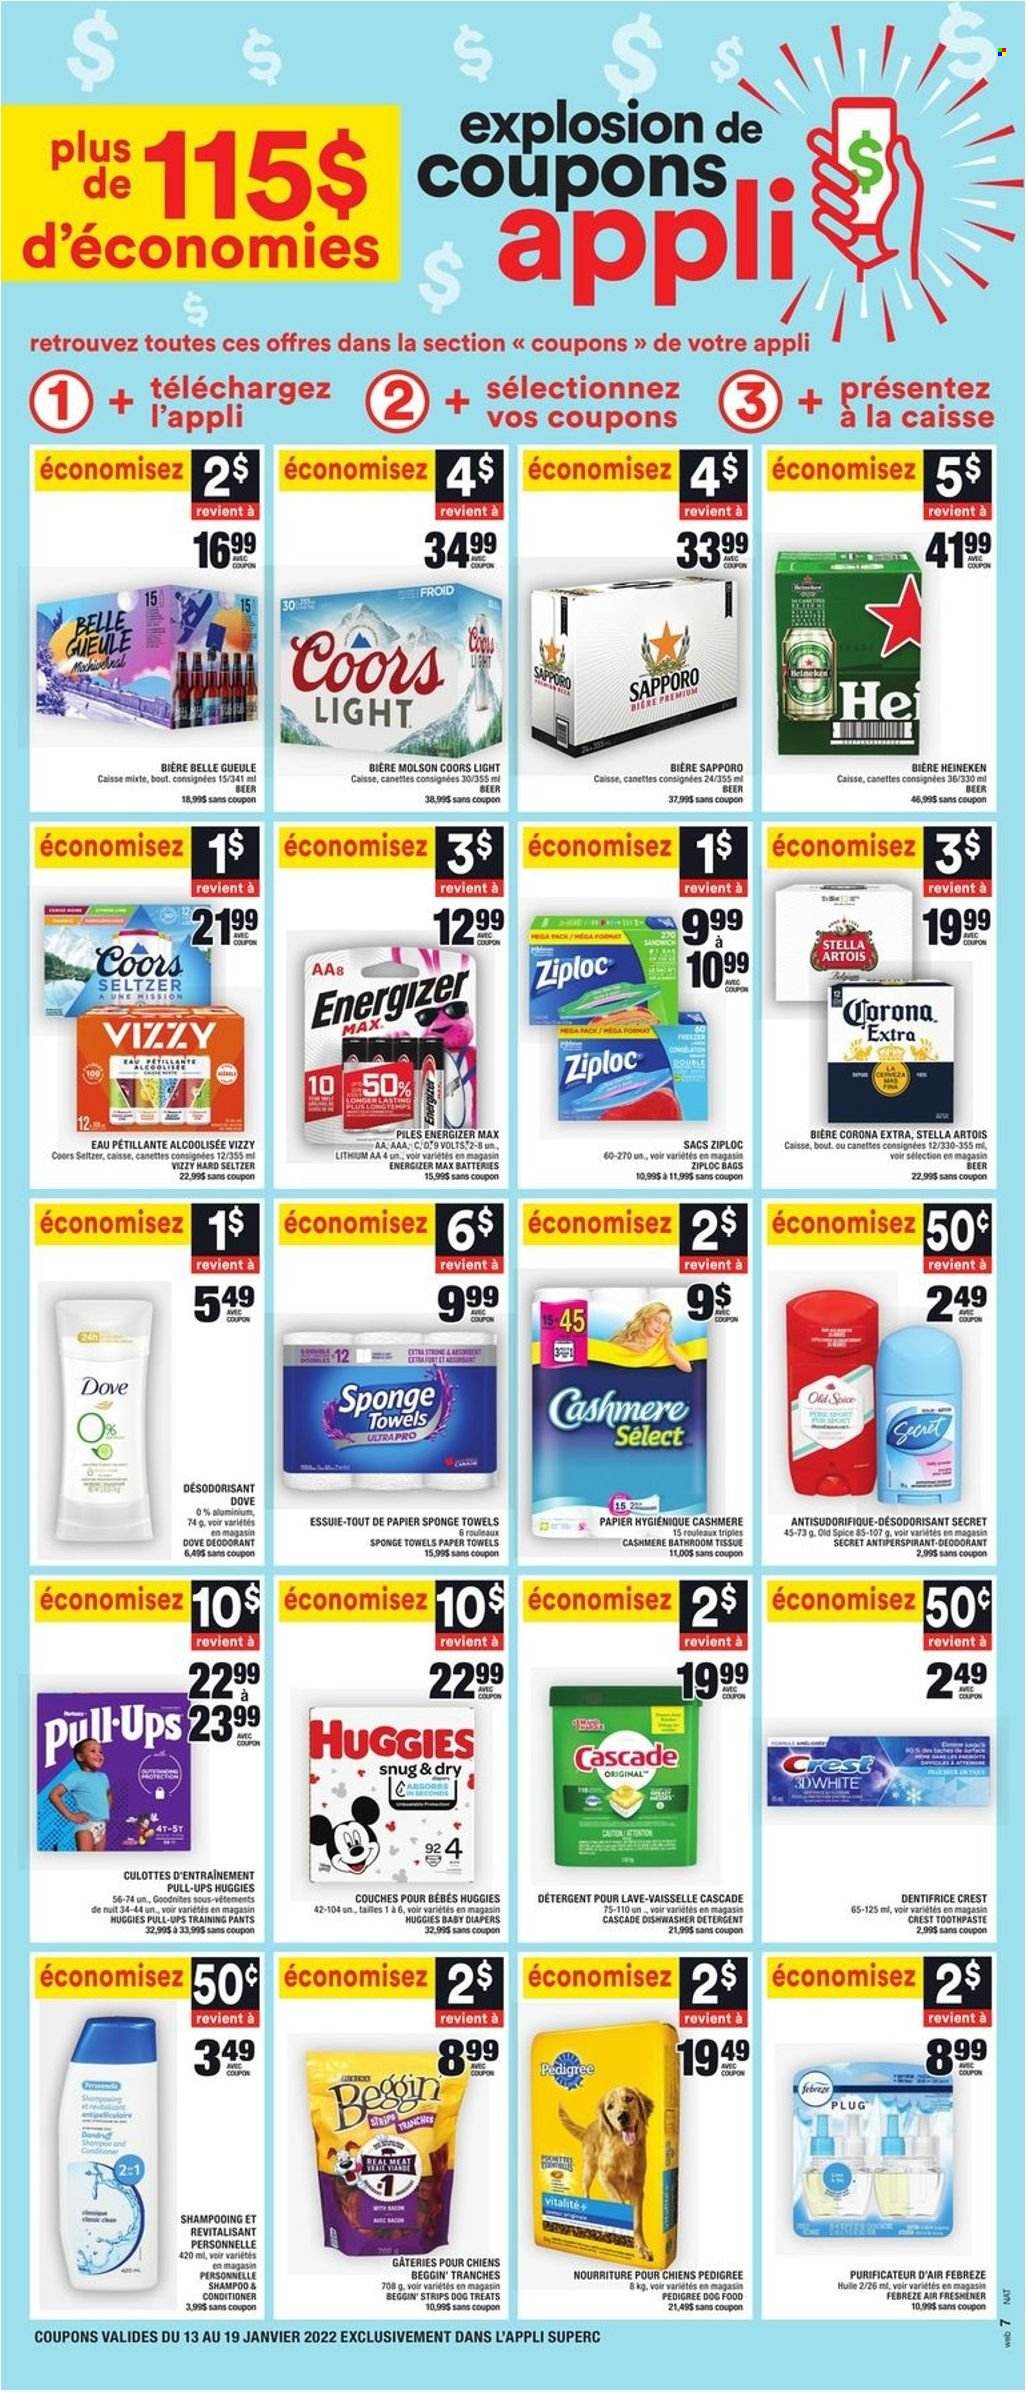 thumbnail - Super C Flyer - January 13, 2022 - January 19, 2022 - Sales products - strips, spice, Hard Seltzer, beer, Corona Extra, Heineken, pants, nappies, baby pants, bath tissue, kitchen towels, paper towels, Febreze, Cascade, toothpaste, Crest, conditioner, anti-perspirant, bag, Ziploc, detergent, Dove, Energizer, shampoo, Stella Artois, Huggies, Old Spice, Coors, deodorant. Page 11.